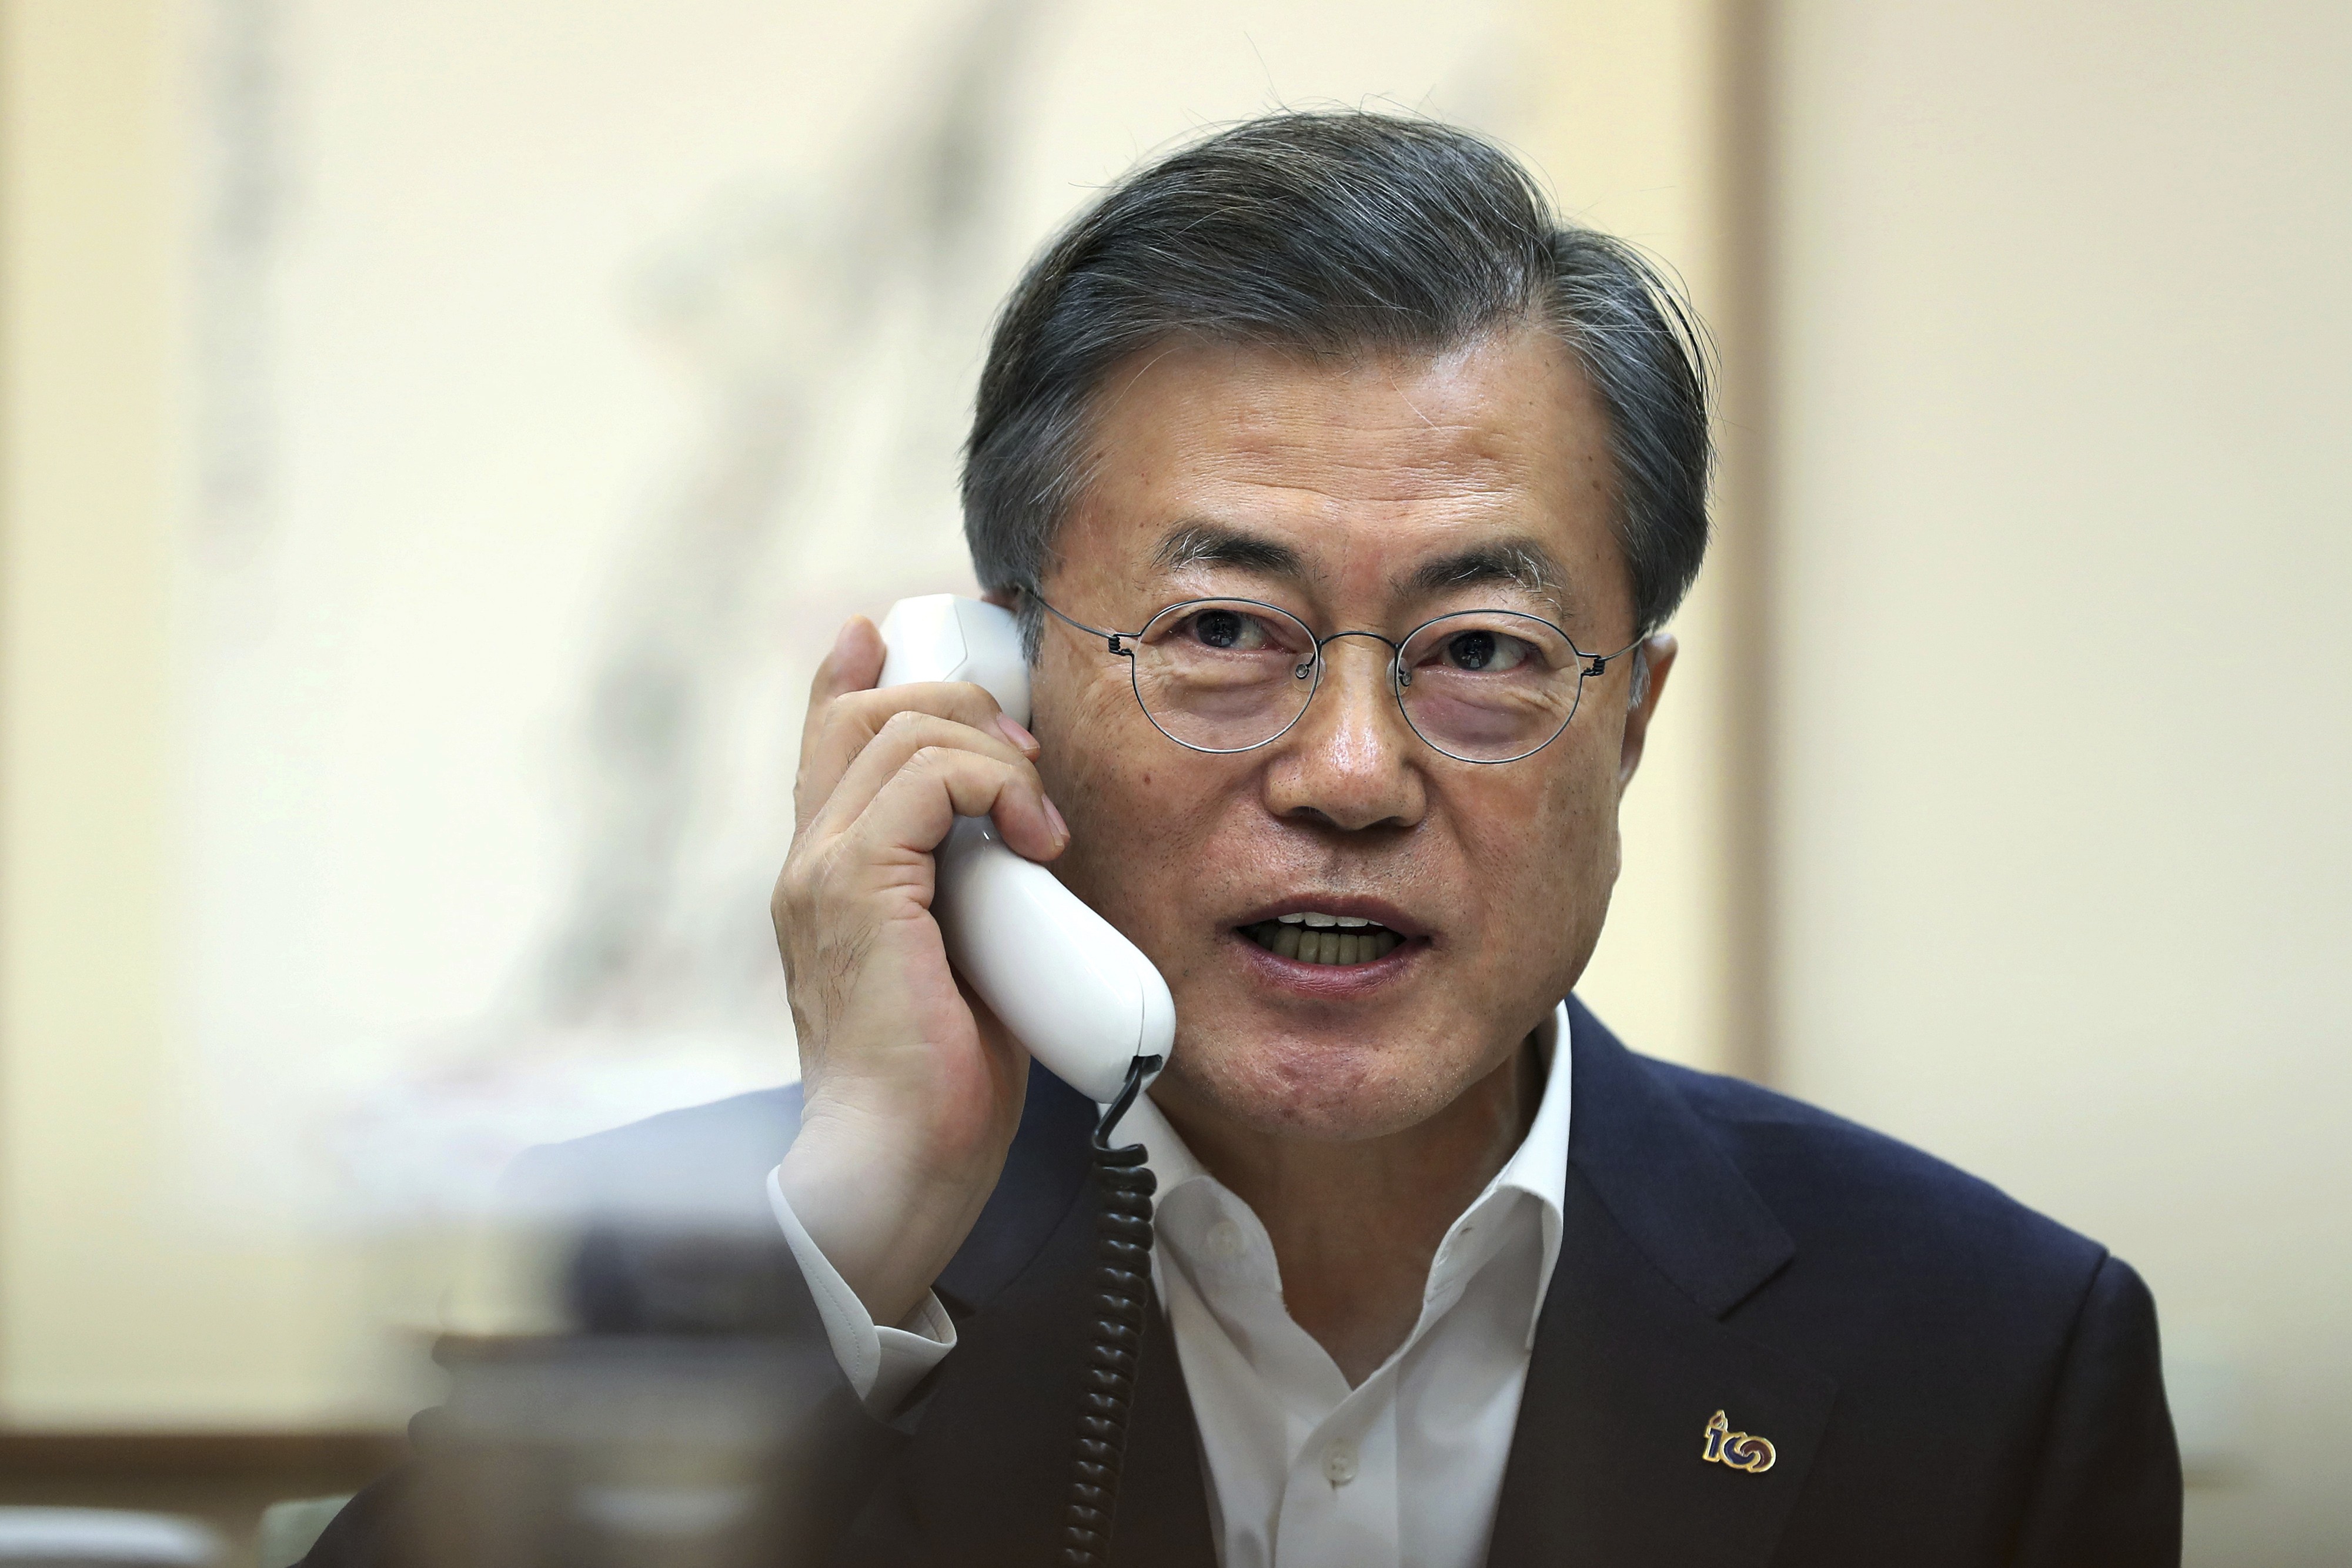 South Korean President Moon Jae-in set off a year of summits last spring by meeting Kim Jong-un and promoting direct talks between Kim and Donald Trump. Photo: South Korea Presidential Blue House via AP